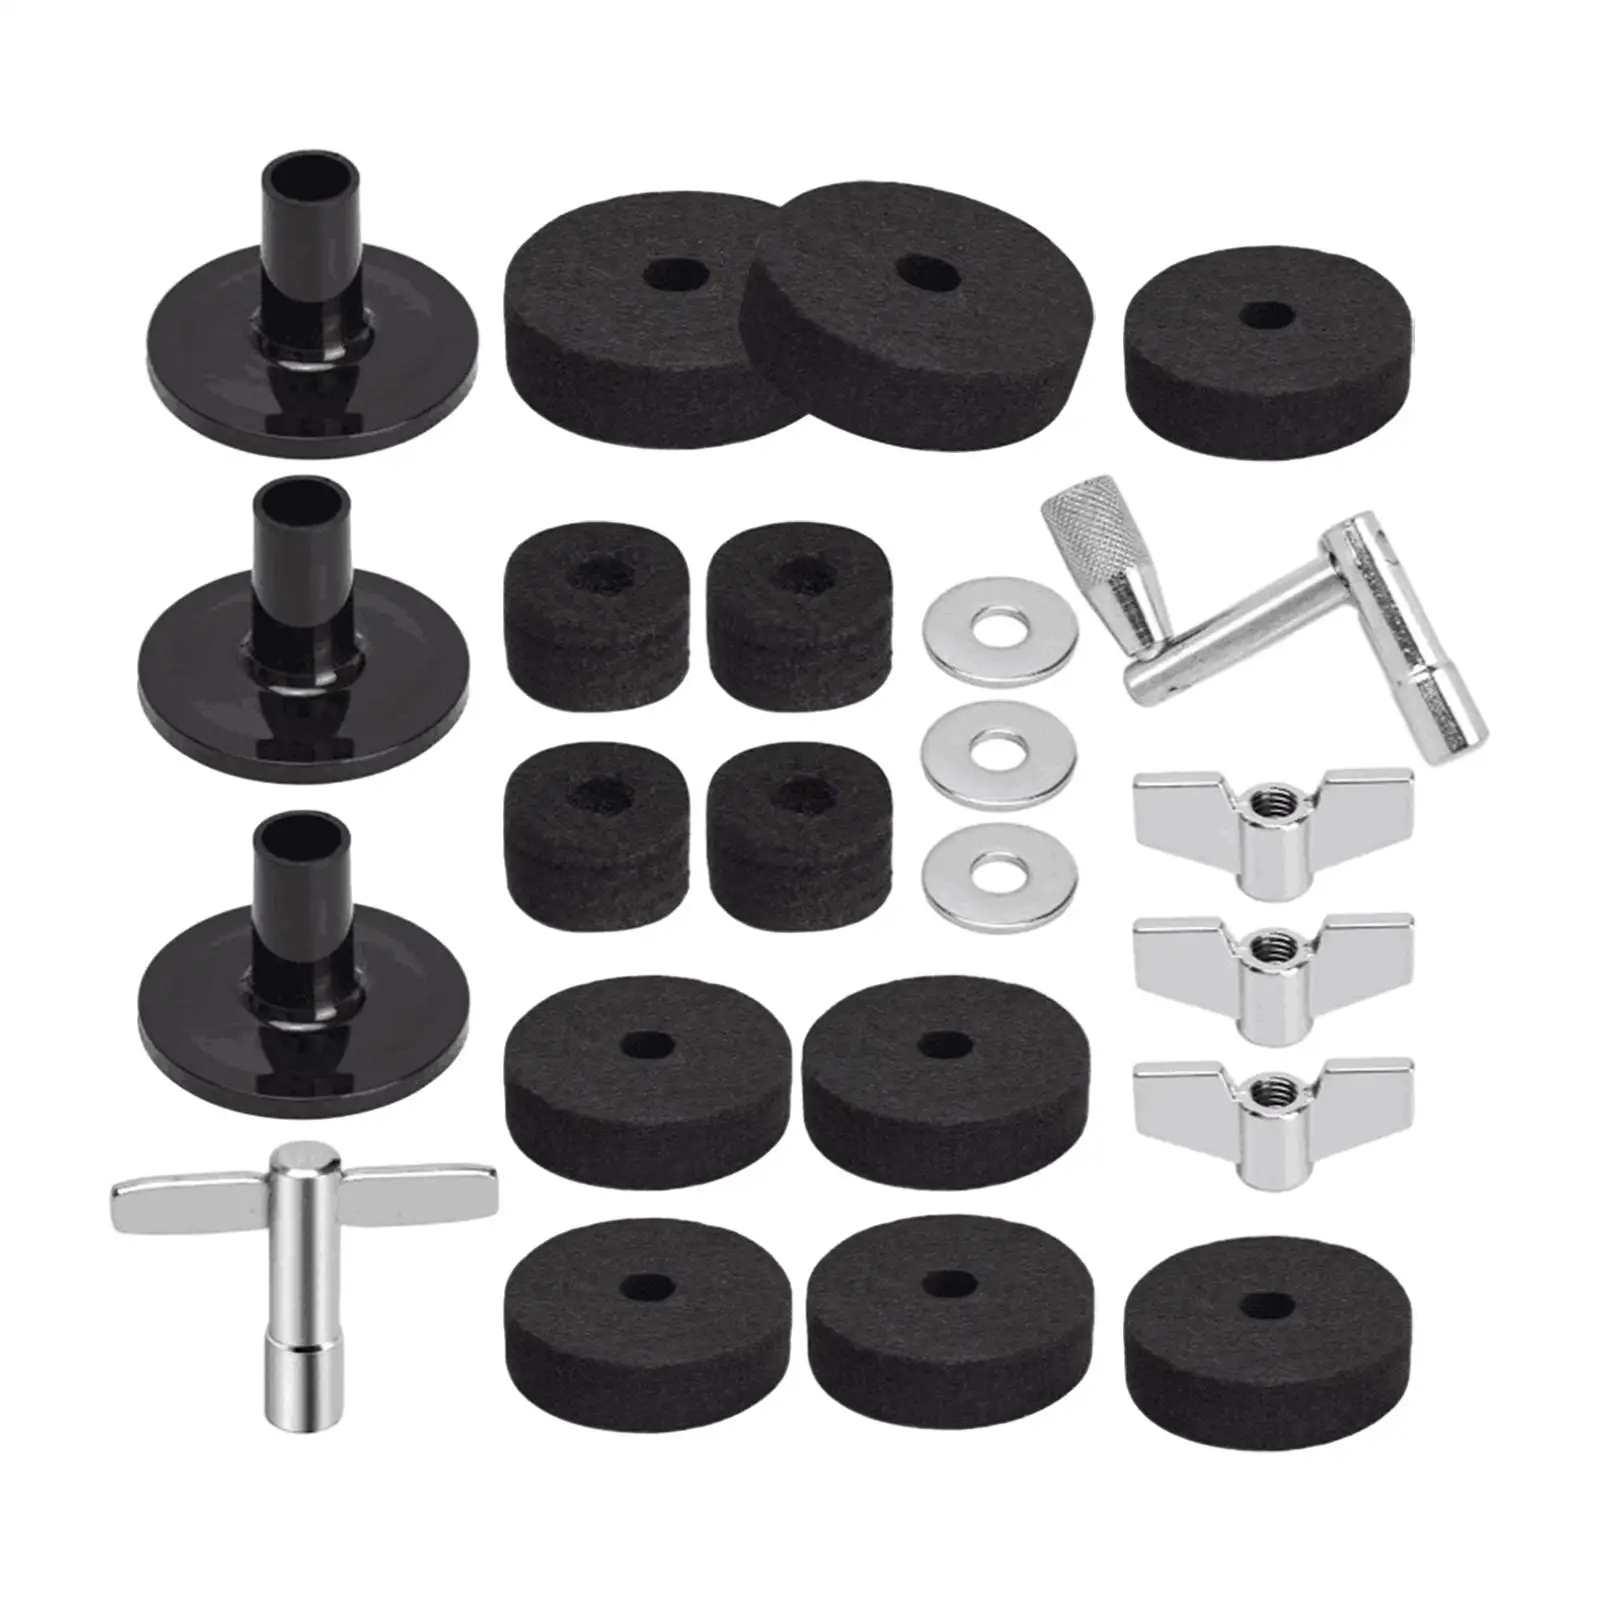 23 Pieces Drum Cymbal Felt Pads Cymbal Stand Felts for Shelf Drum Kits